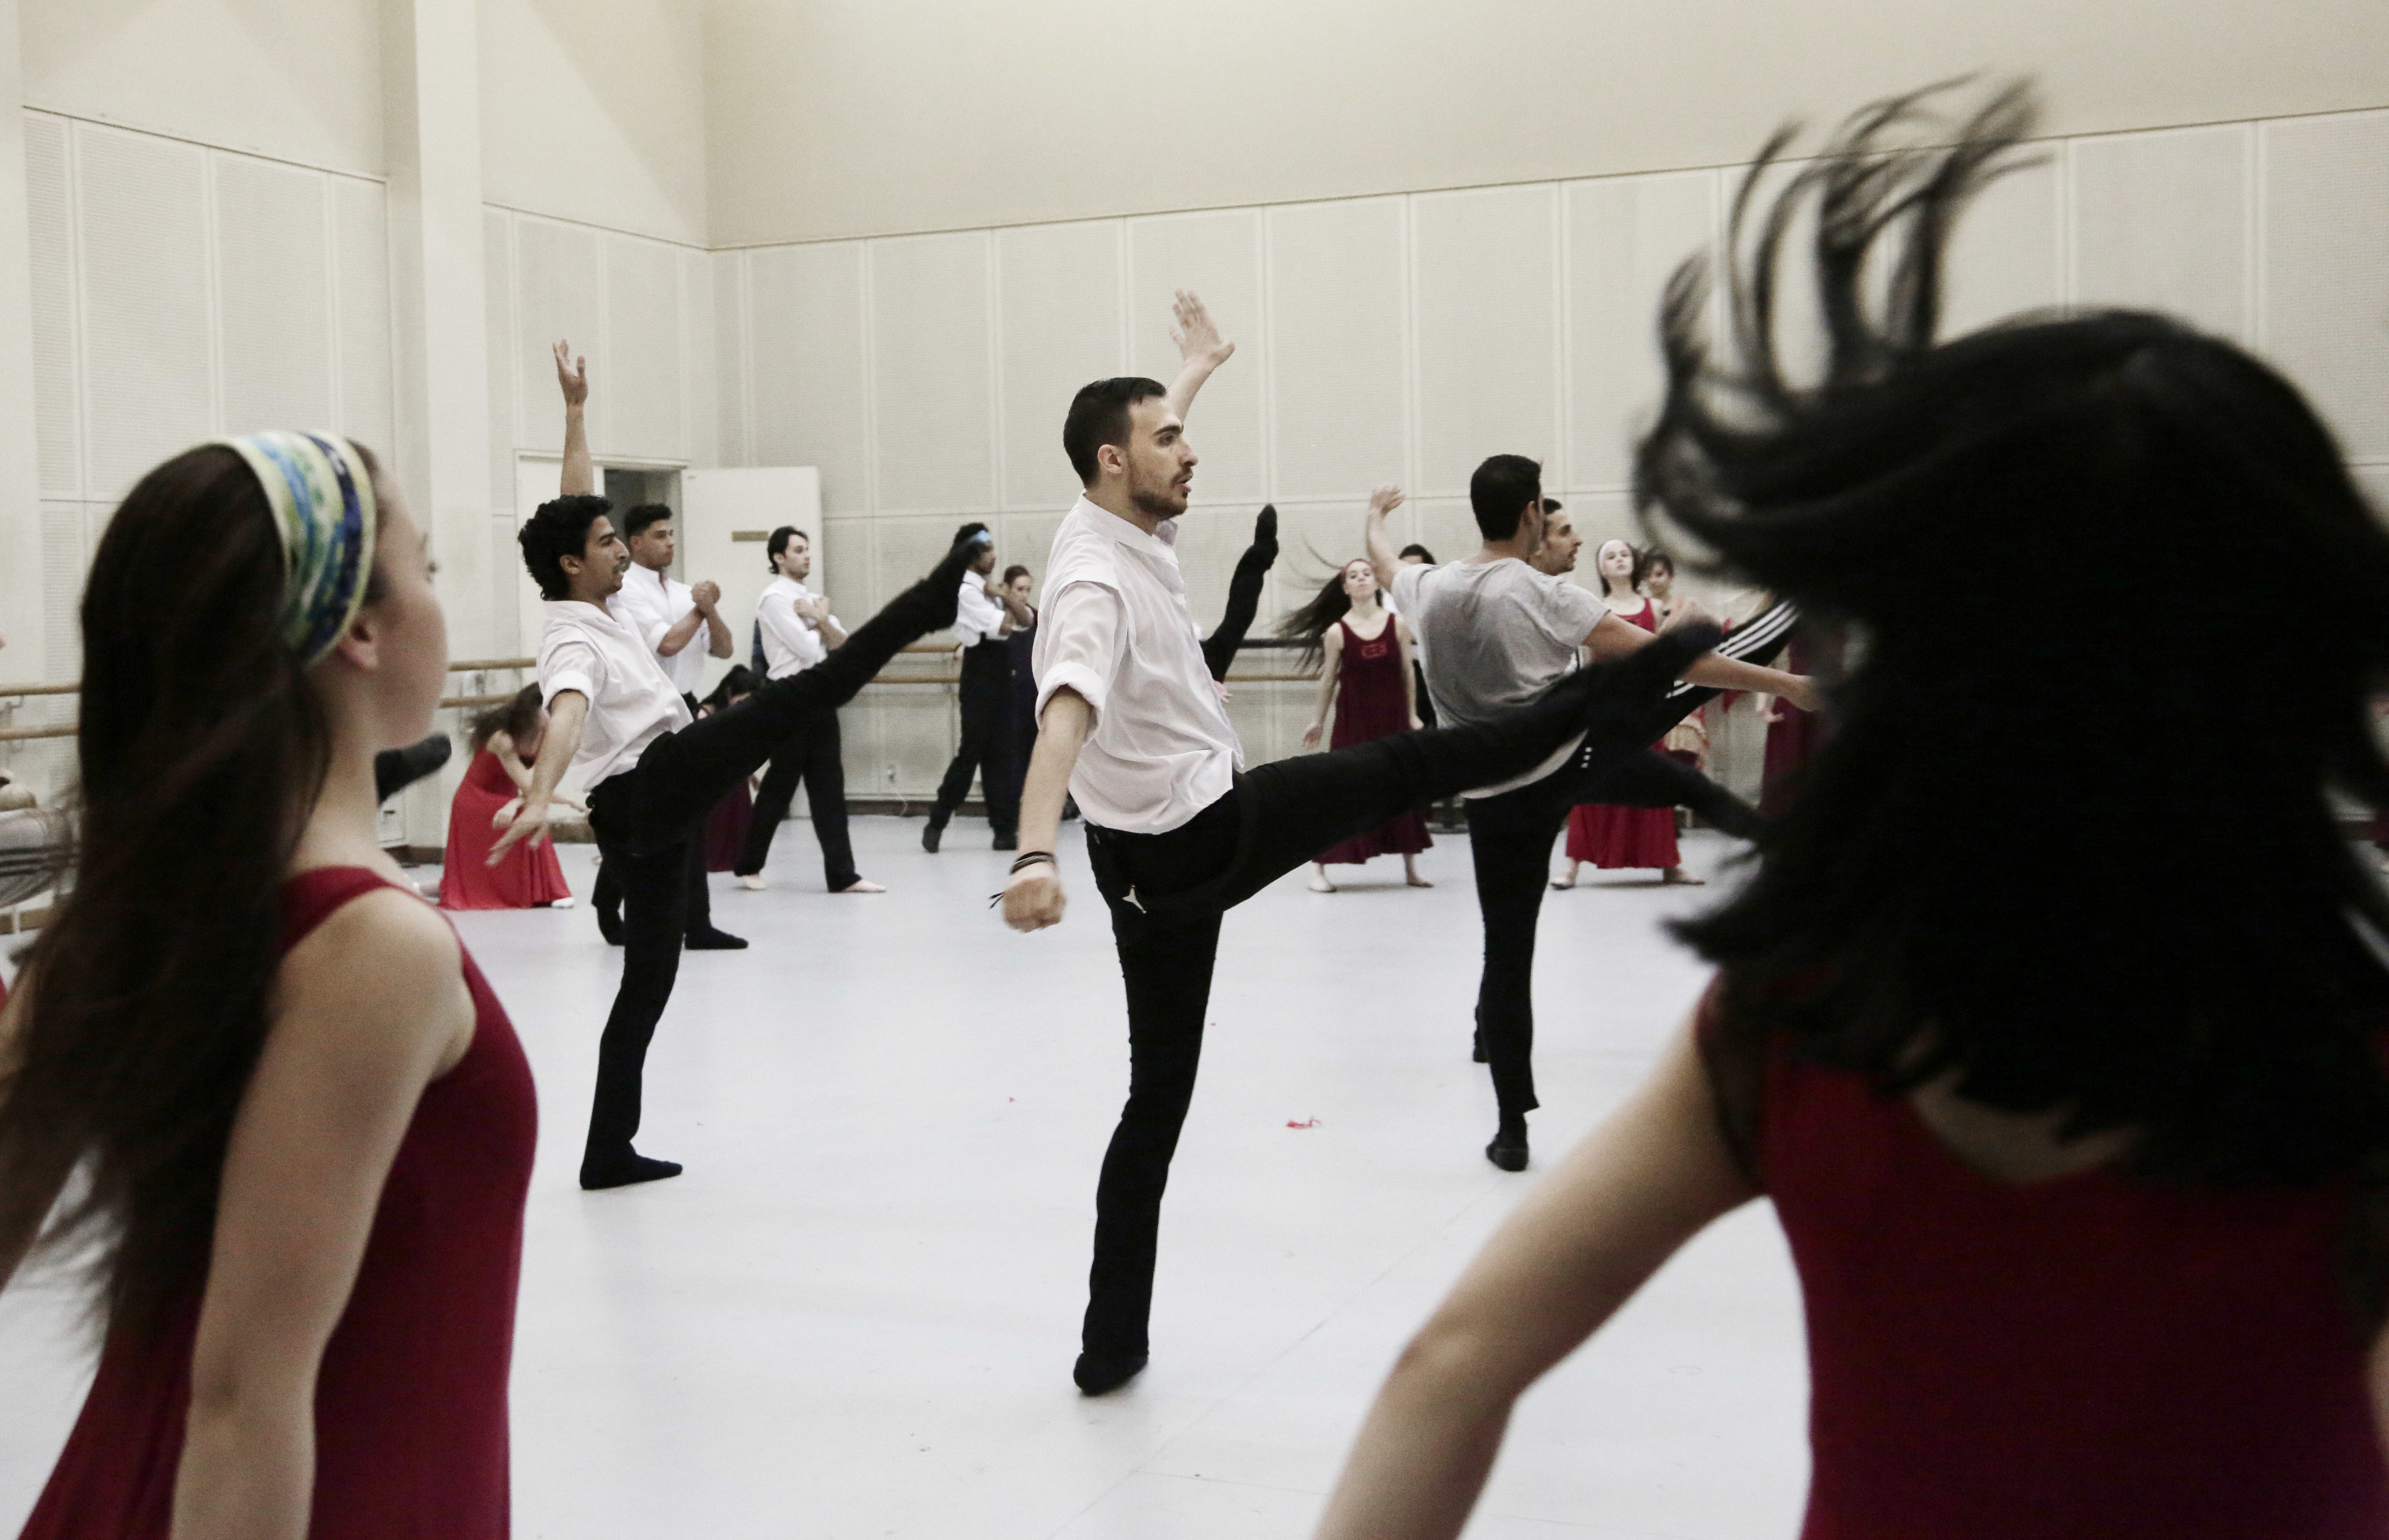 In this March 23, 2017 photo, Fady el-Nabarawy, center, practices during a rehearsal at the Cairo Opera House, Egypt. Egypt’s national ballet company is rebuilding after years of political turmoil and economic pain. Ballet may be an elite Western art, it may be far removed from Egyptian society, which has grown more religiously conservative and xenophobic. But it’s still a powerful passion for the Egyptians who dance it and watch it. (AP Photo/Nariman El-Mofty)